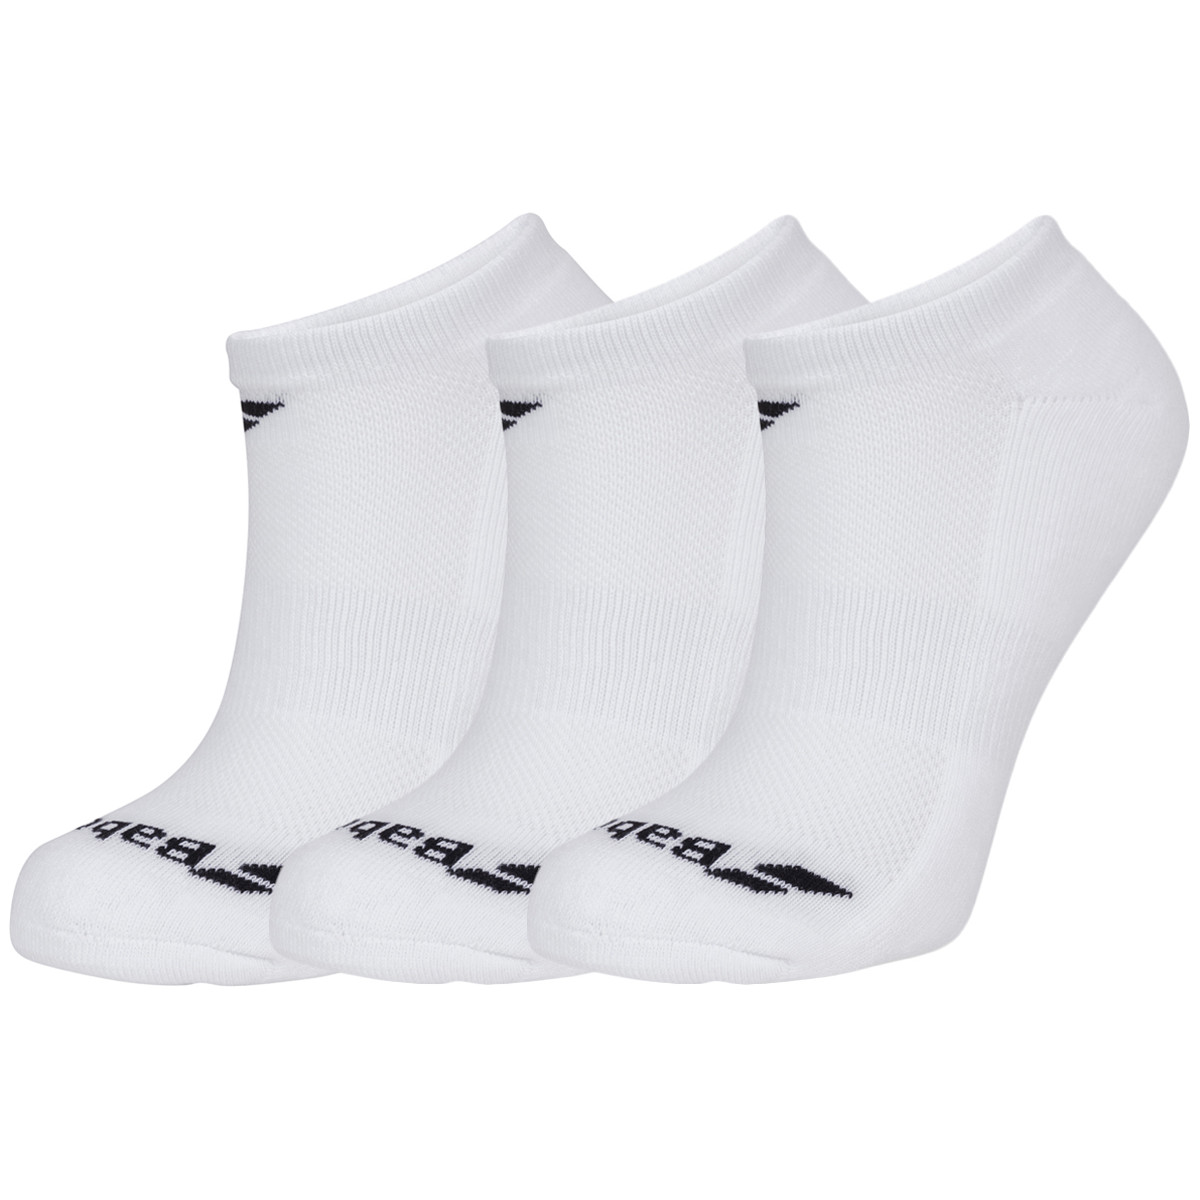 CHAUSSETTES BABOLAT INVISIBLE 2 PAIRES HOMME BLANC